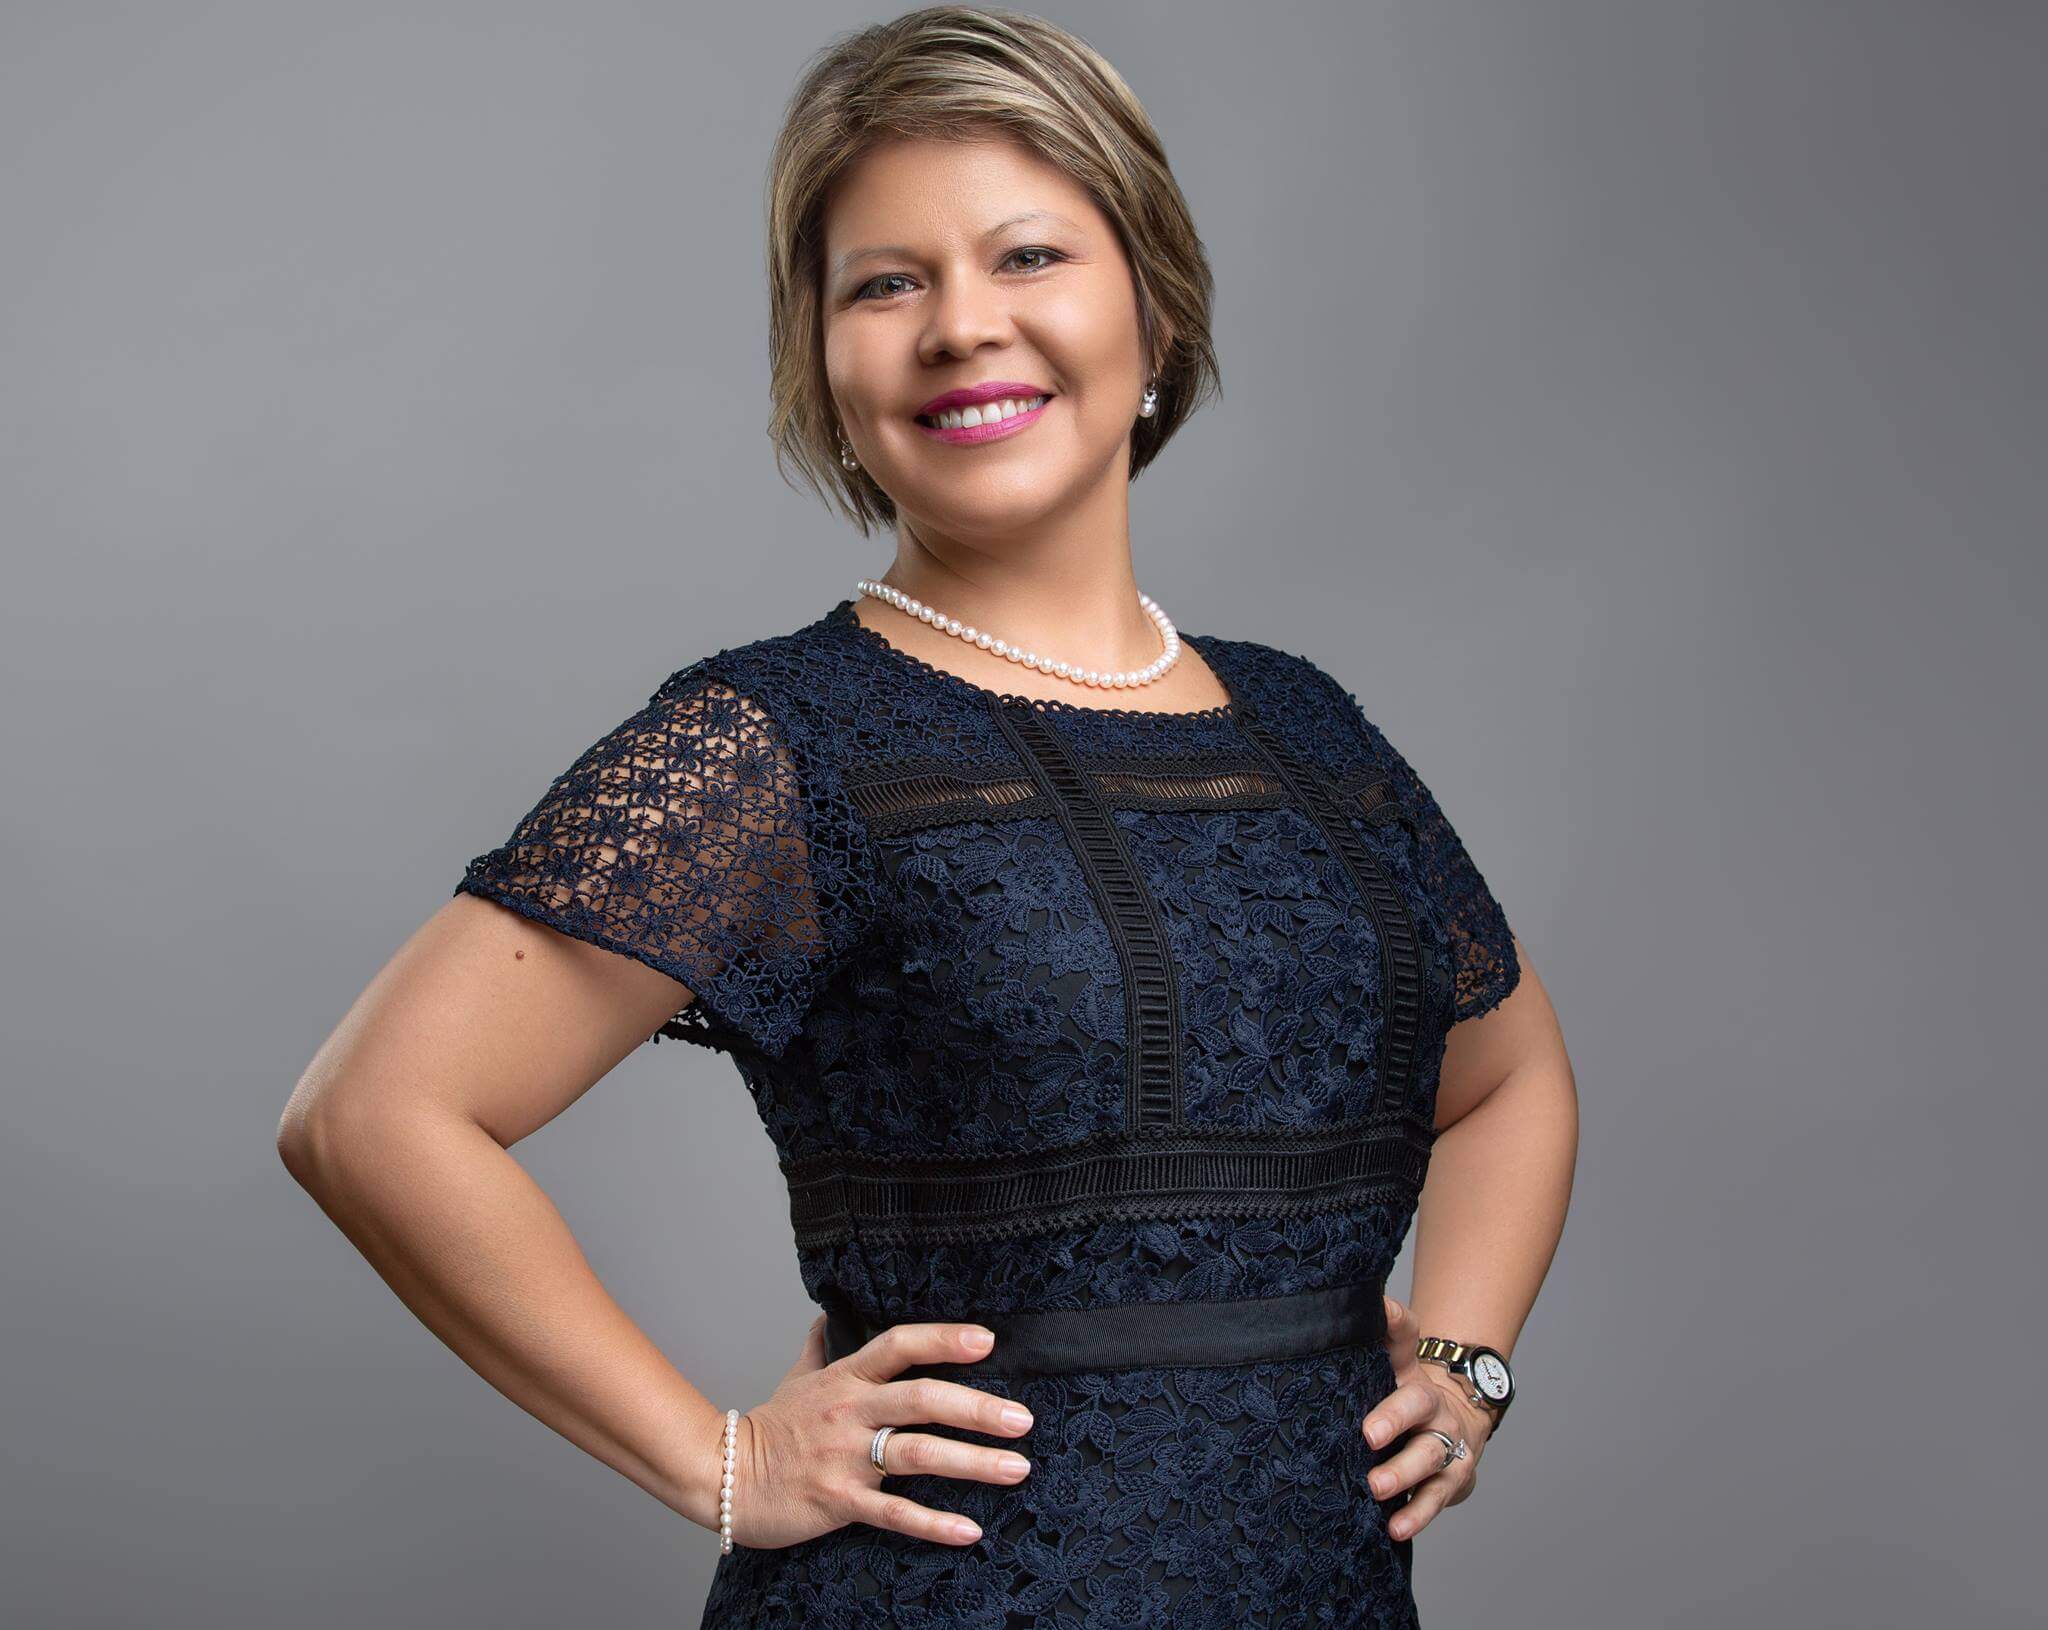 Dr. Patricia Campos-Media in a navy blue dress in front of a gray backgorund